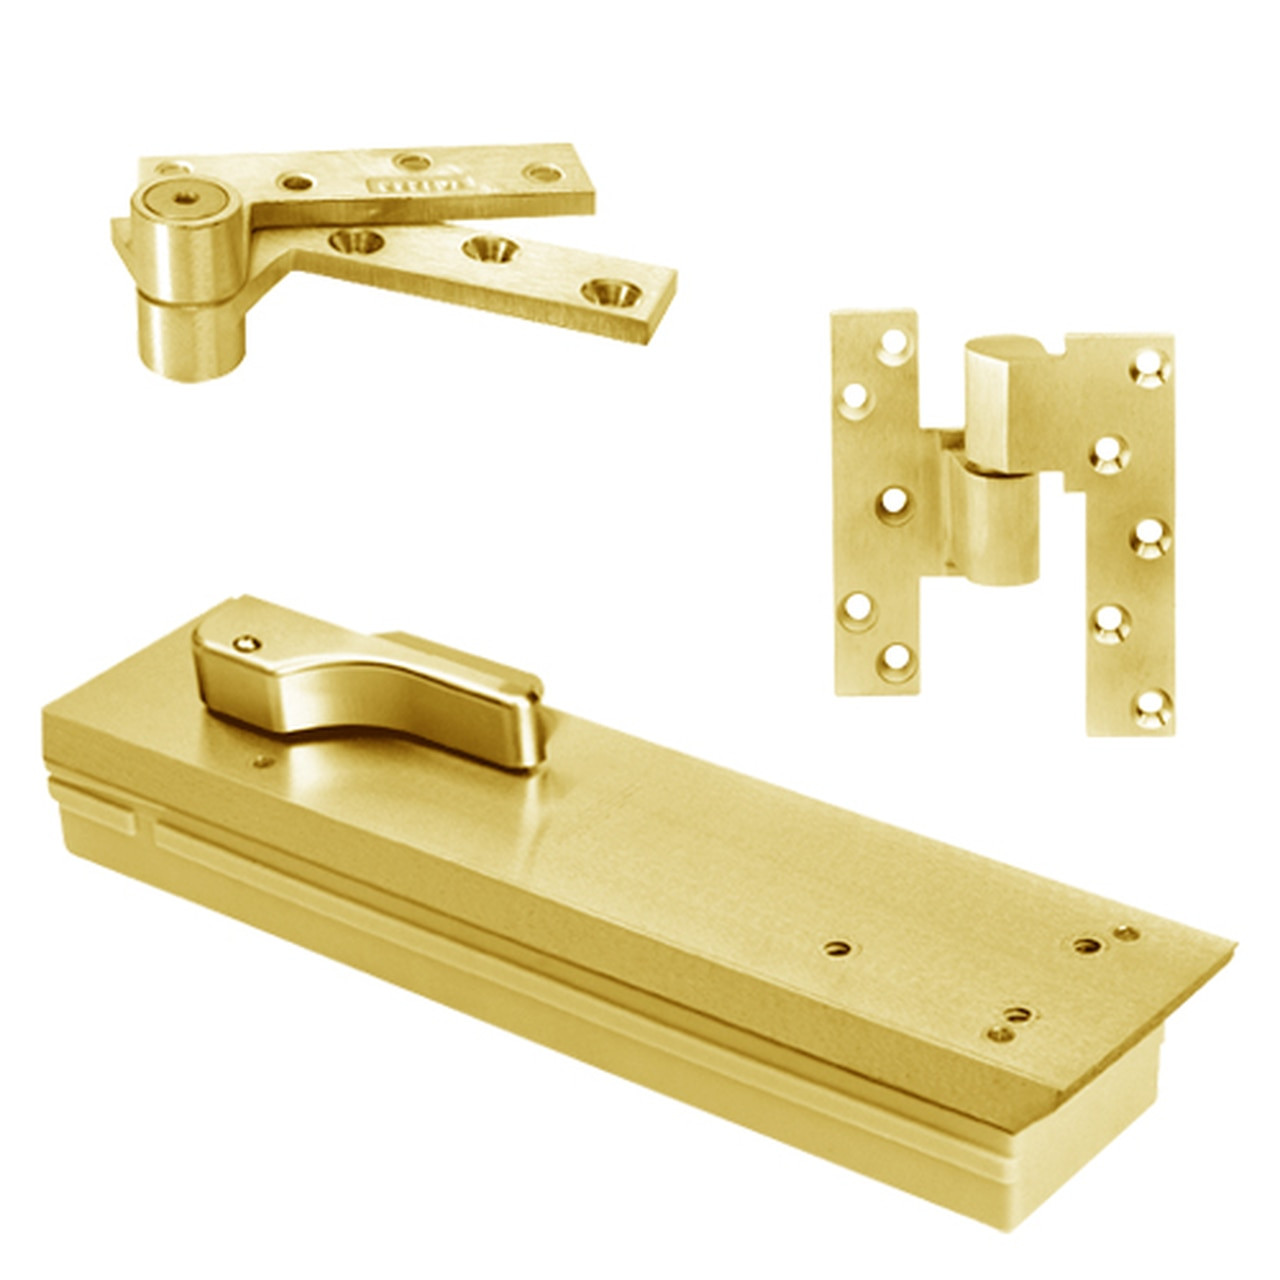 FQ5105NBC-LFP-LCC-RH-605 Rixson Q51 Series Fire Rated 3/4" Offset Hung Shallow Depth Floor Closers in Bright Brass Finish